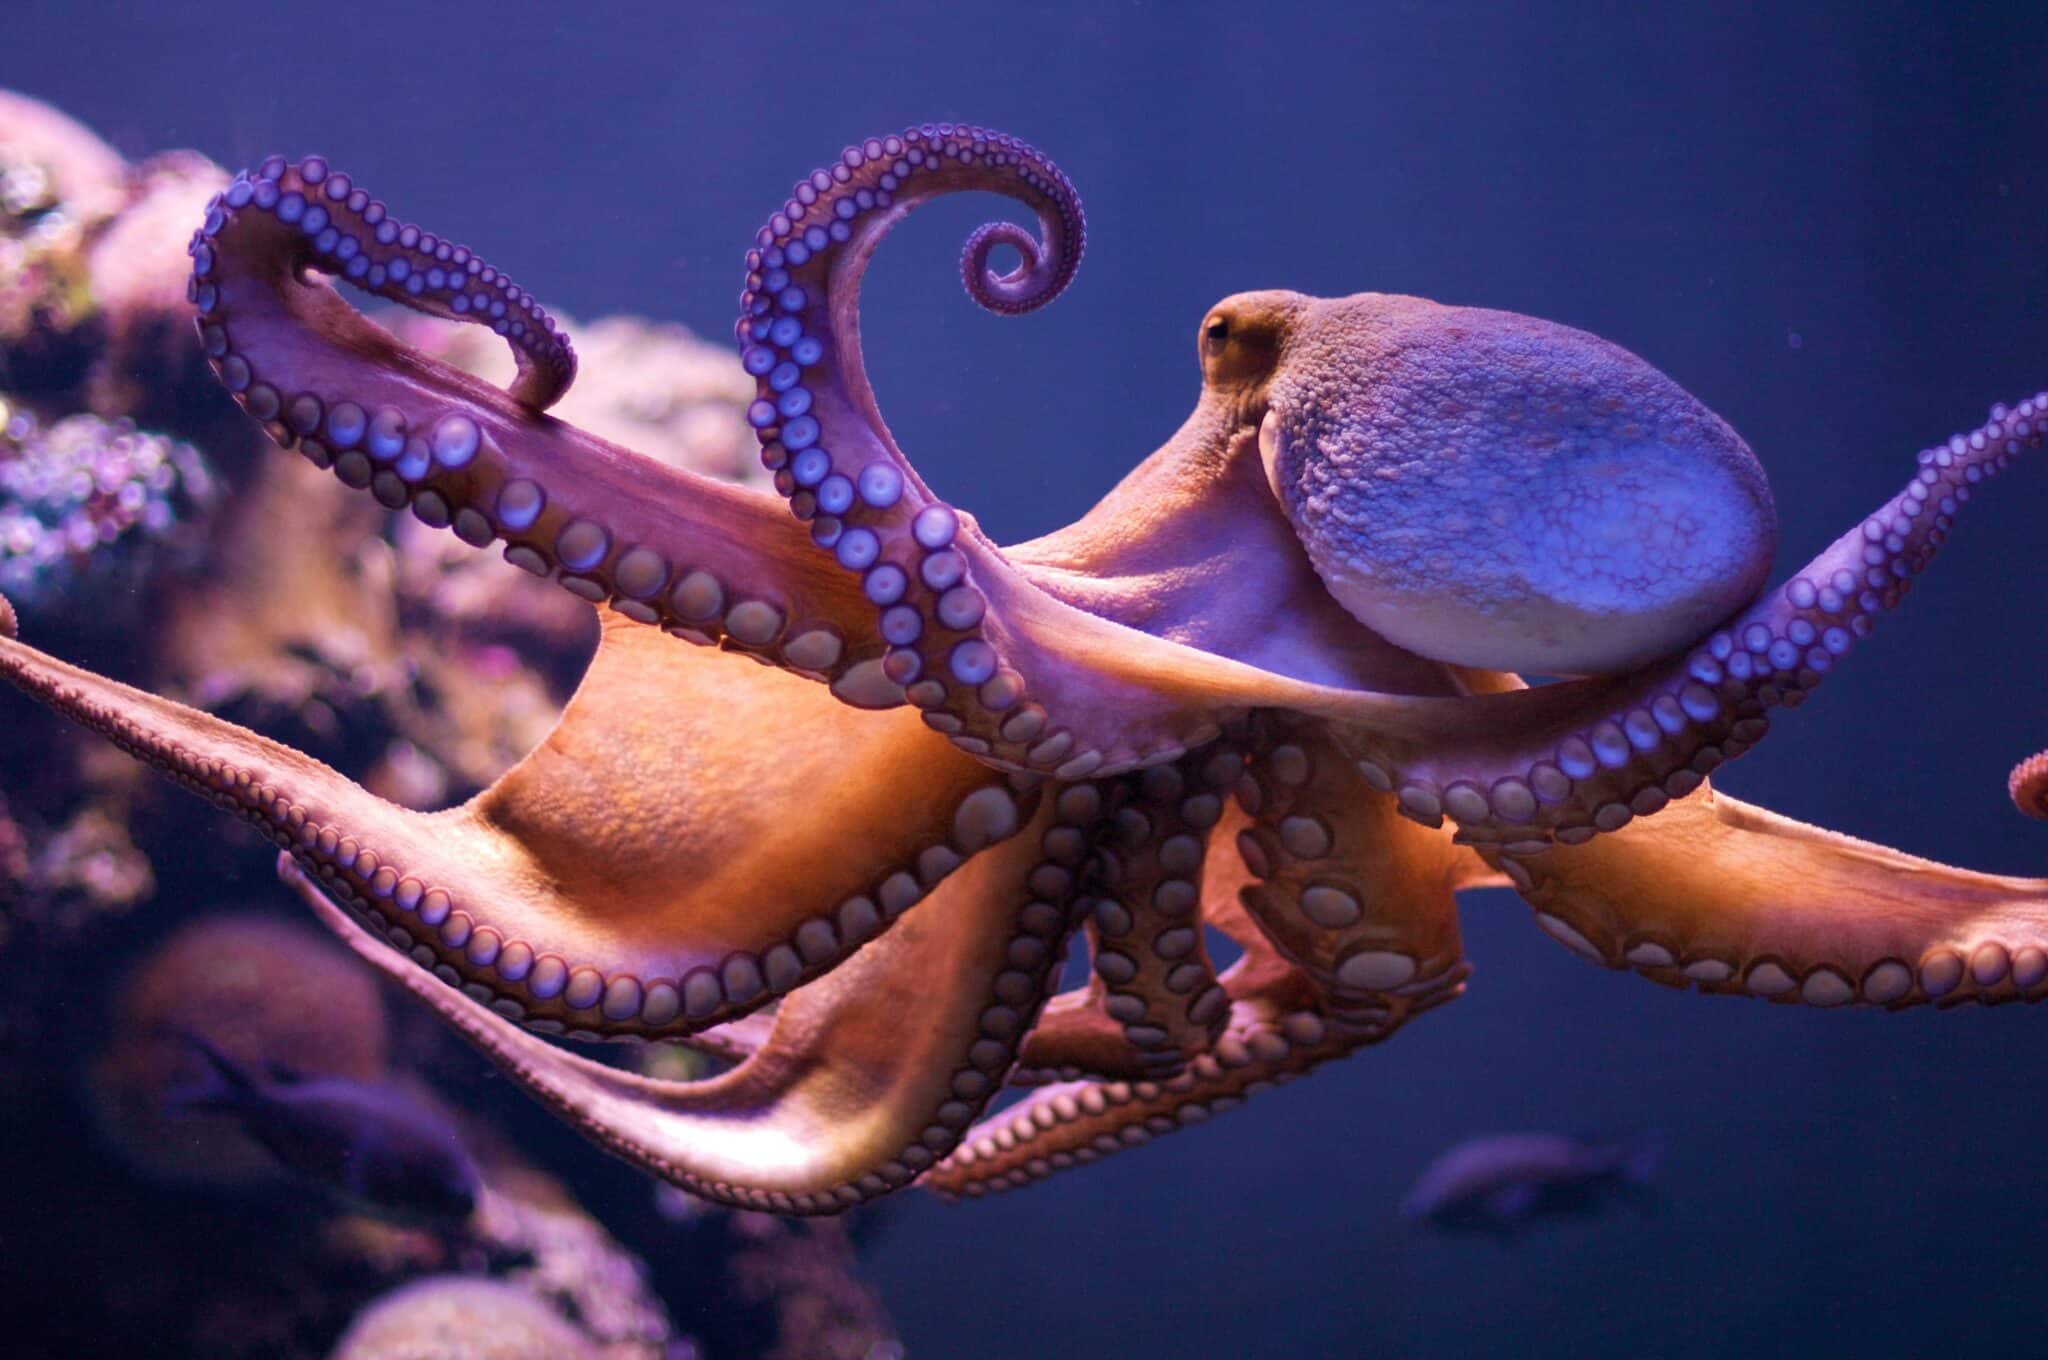  Does Octopus Have Eyes